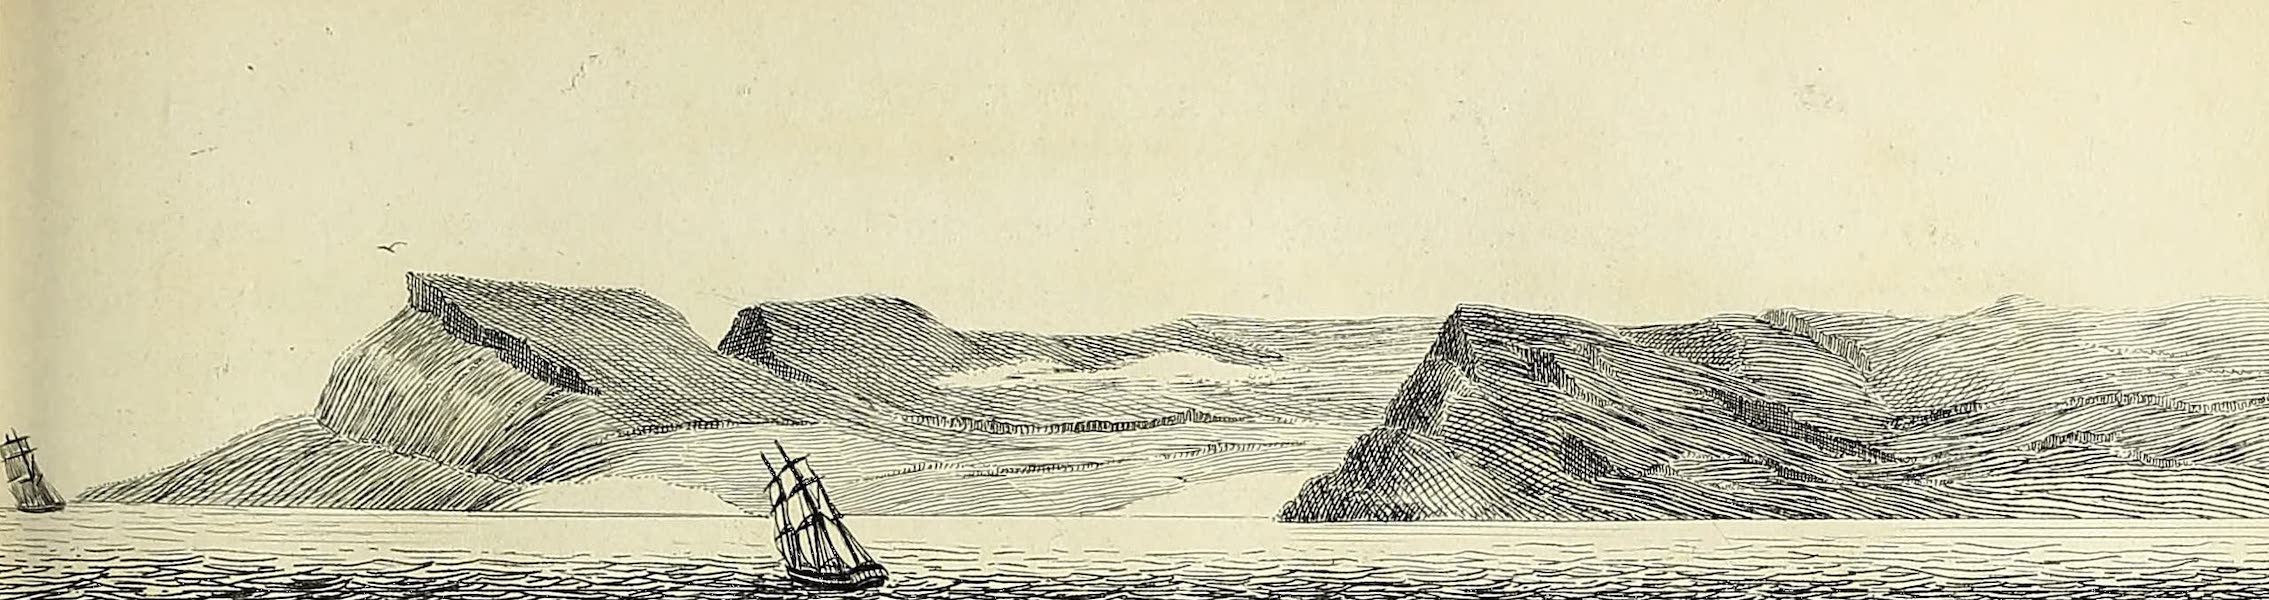 Cape Hotham, bearing W. by S.